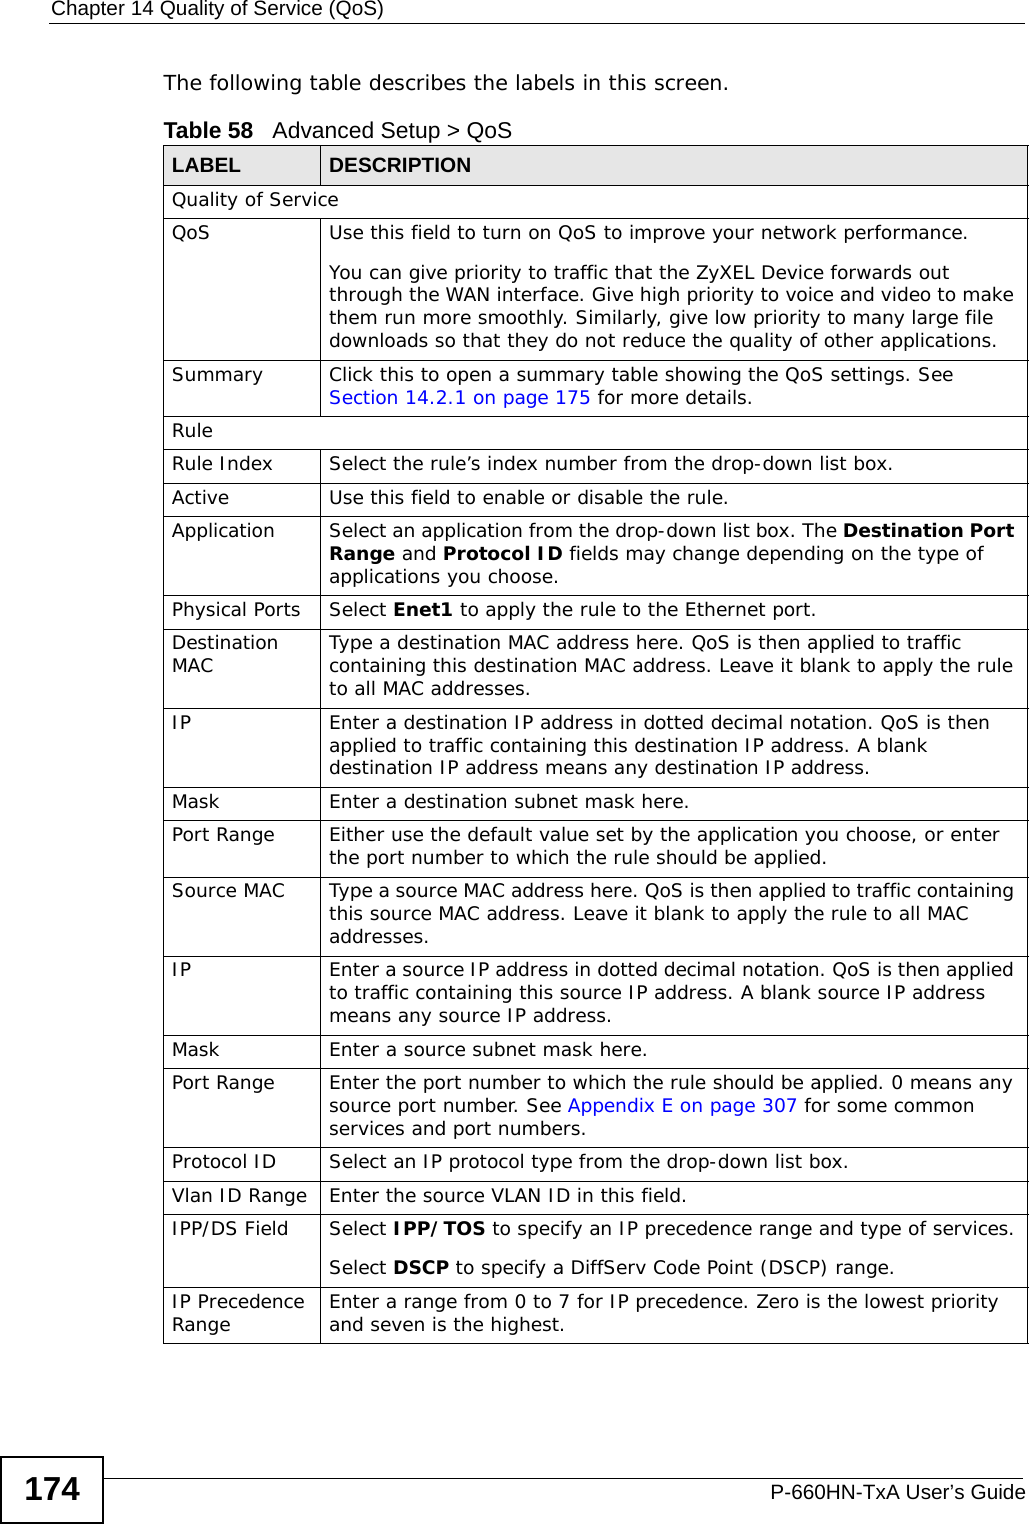 Chapter 14 Quality of Service (QoS)P-660HN-TxA User’s Guide174The following table describes the labels in this screen. Table 58   Advanced Setup &gt; QoSLABEL DESCRIPTIONQuality of ServiceQoS Use this field to turn on QoS to improve your network performance. You can give priority to traffic that the ZyXEL Device forwards out through the WAN interface. Give high priority to voice and video to make them run more smoothly. Similarly, give low priority to many large file downloads so that they do not reduce the quality of other applications. Summary Click this to open a summary table showing the QoS settings. See Section 14.2.1 on page 175 for more details.RuleRule Index Select the rule’s index number from the drop-down list box.Active Use this field to enable or disable the rule.Application Select an application from the drop-down list box. The Destination Port Range and Protocol ID fields may change depending on the type of applications you choose.Physical Ports Select Enet1 to apply the rule to the Ethernet port.Destination MAC Type a destination MAC address here. QoS is then applied to traffic containing this destination MAC address. Leave it blank to apply the rule to all MAC addresses.IP Enter a destination IP address in dotted decimal notation. QoS is then applied to traffic containing this destination IP address. A blank destination IP address means any destination IP address.Mask Enter a destination subnet mask here.Port Range Either use the default value set by the application you choose, or enter the port number to which the rule should be applied.Source MAC Type a source MAC address here. QoS is then applied to traffic containing this source MAC address. Leave it blank to apply the rule to all MAC addresses.IP Enter a source IP address in dotted decimal notation. QoS is then applied to traffic containing this source IP address. A blank source IP address means any source IP address.Mask Enter a source subnet mask here.Port Range Enter the port number to which the rule should be applied. 0 means any source port number. See Appendix E on page 307 for some common services and port numbers.Protocol ID Select an IP protocol type from the drop-down list box.Vlan ID Range Enter the source VLAN ID in this field.IPP/DS Field Select IPP/TOS to specify an IP precedence range and type of services.Select DSCP to specify a DiffServ Code Point (DSCP) range.IP Precedence Range Enter a range from 0 to 7 for IP precedence. Zero is the lowest priority and seven is the highest.